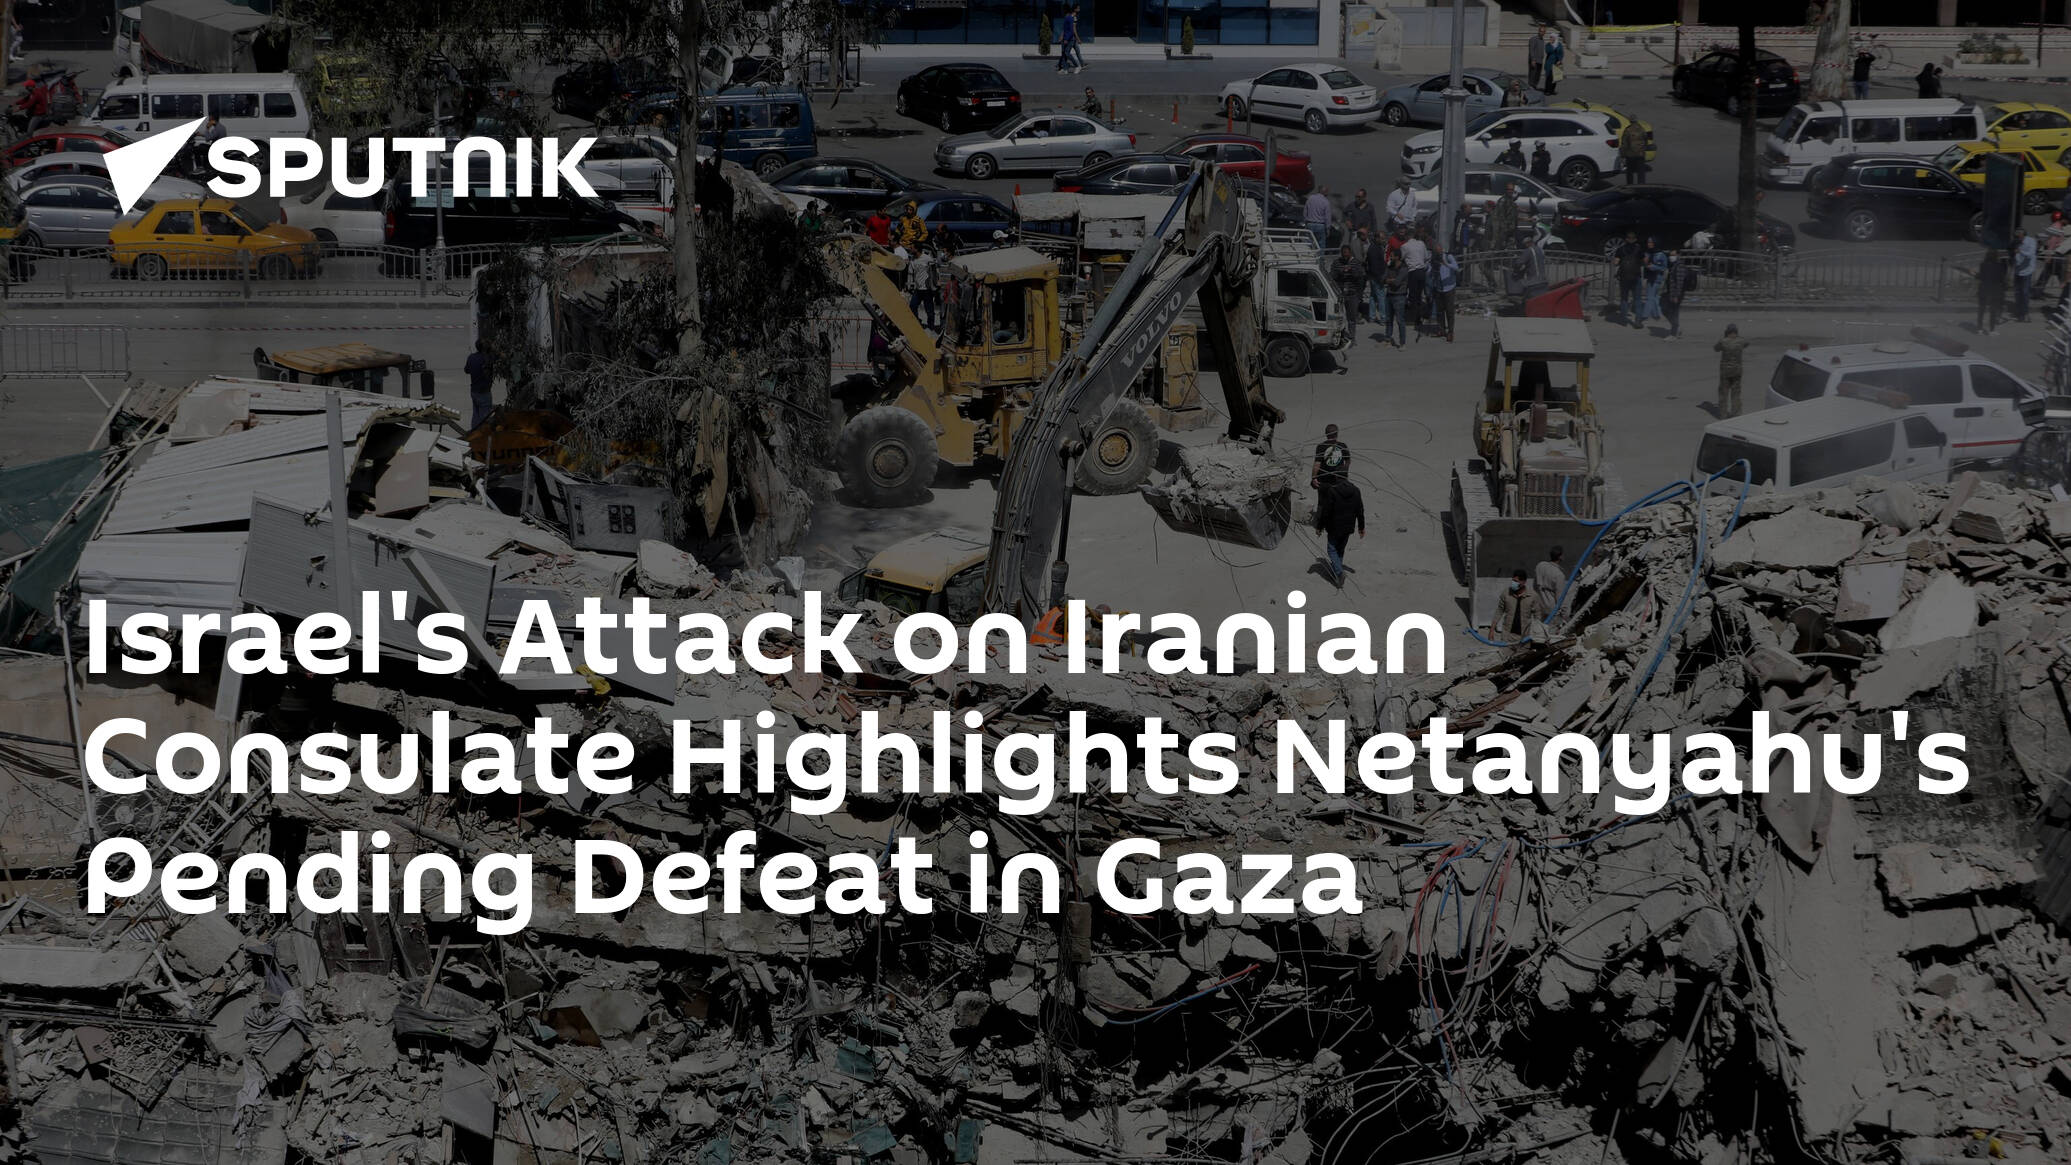 Israel's Attack on Iranian Consulate Highlights Netanyahu's Pending Defeat in Gaza